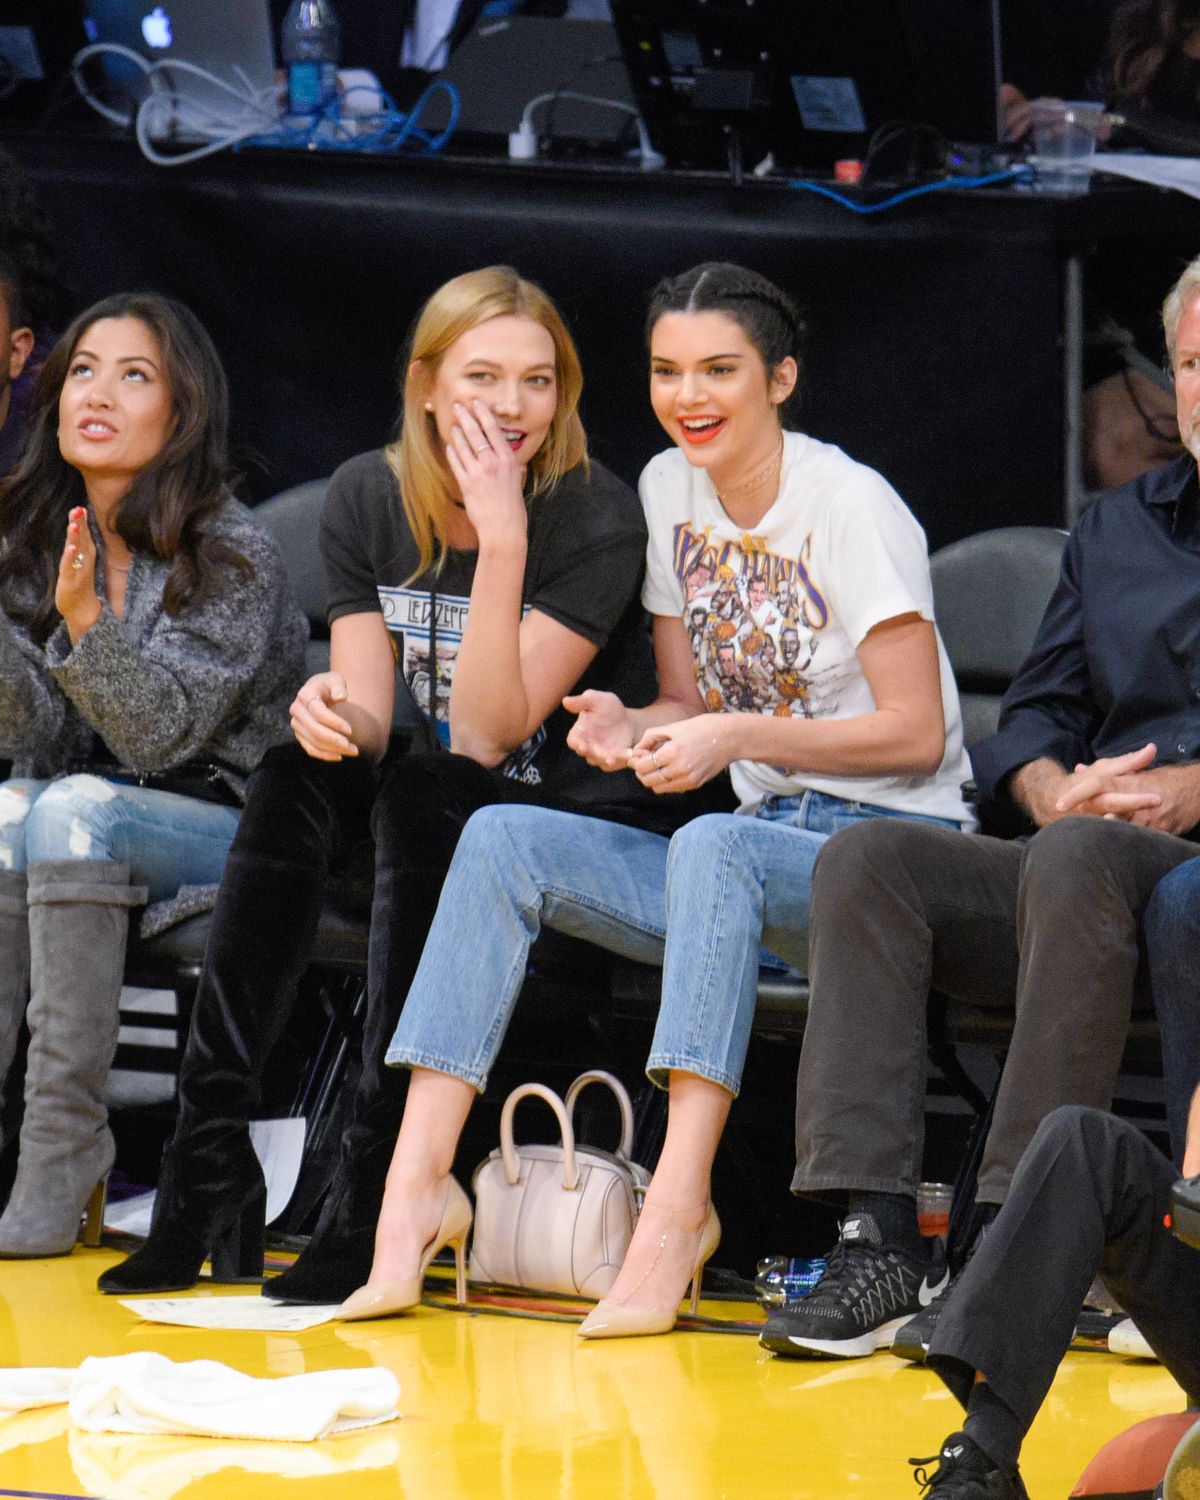 KENDALL JENNER and KARLIE KLOSS at Houston Rockets vs LA Lakers Game in ...